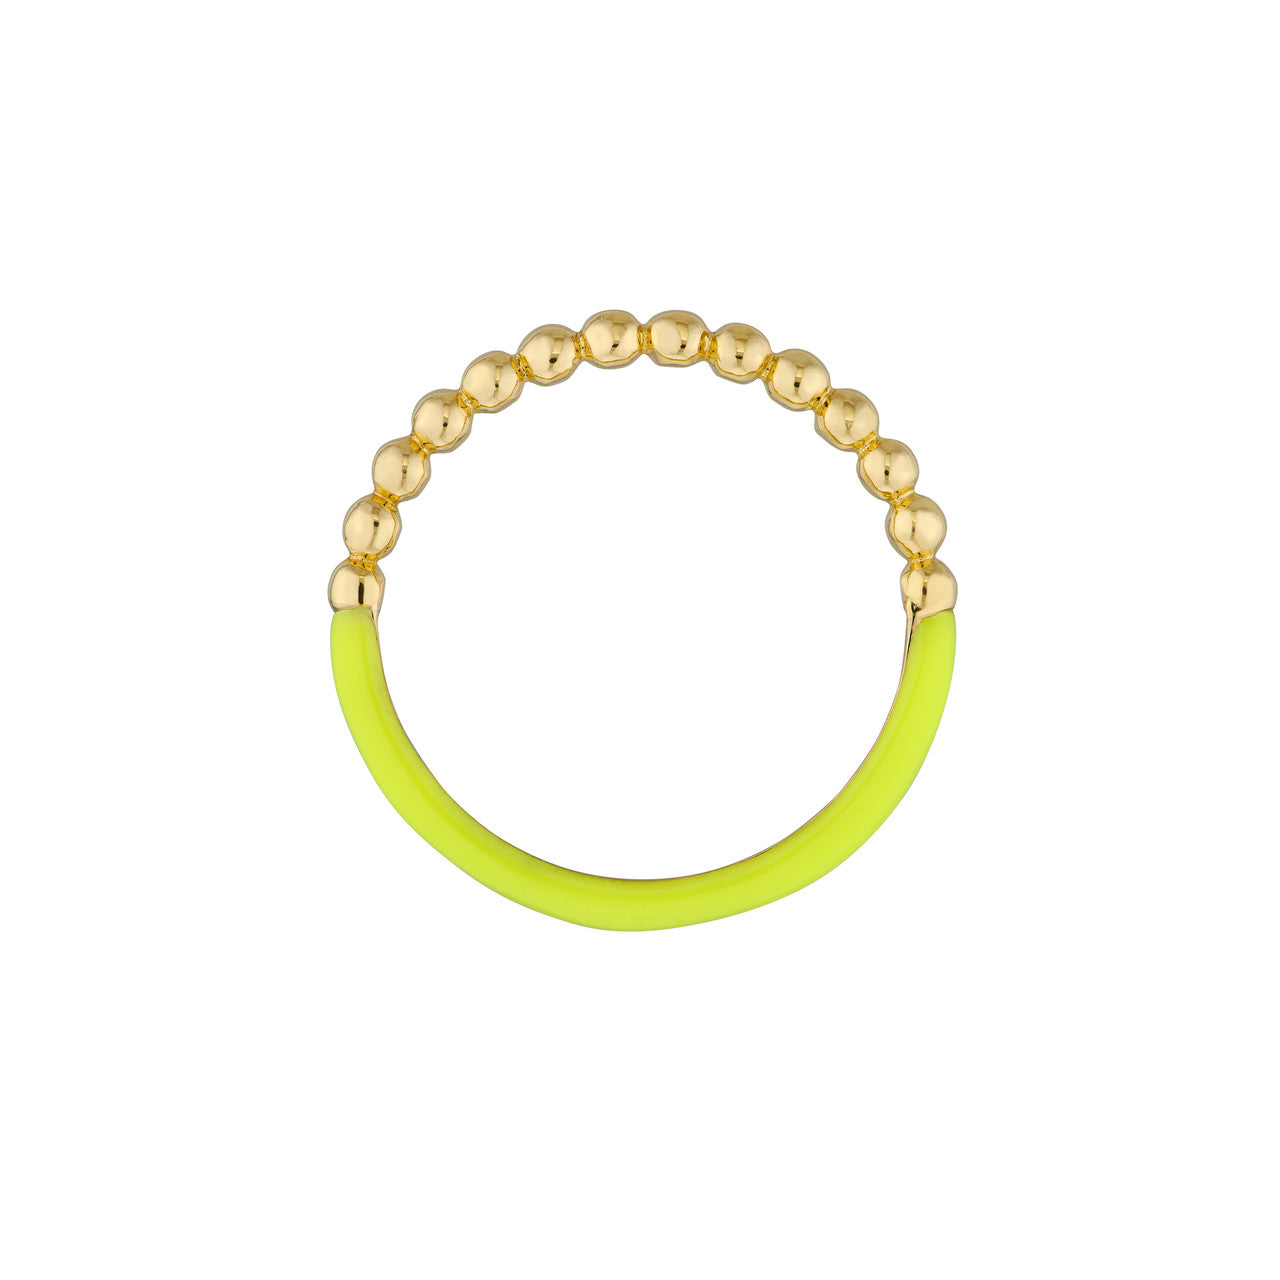 A yellow bracelet with gold beads